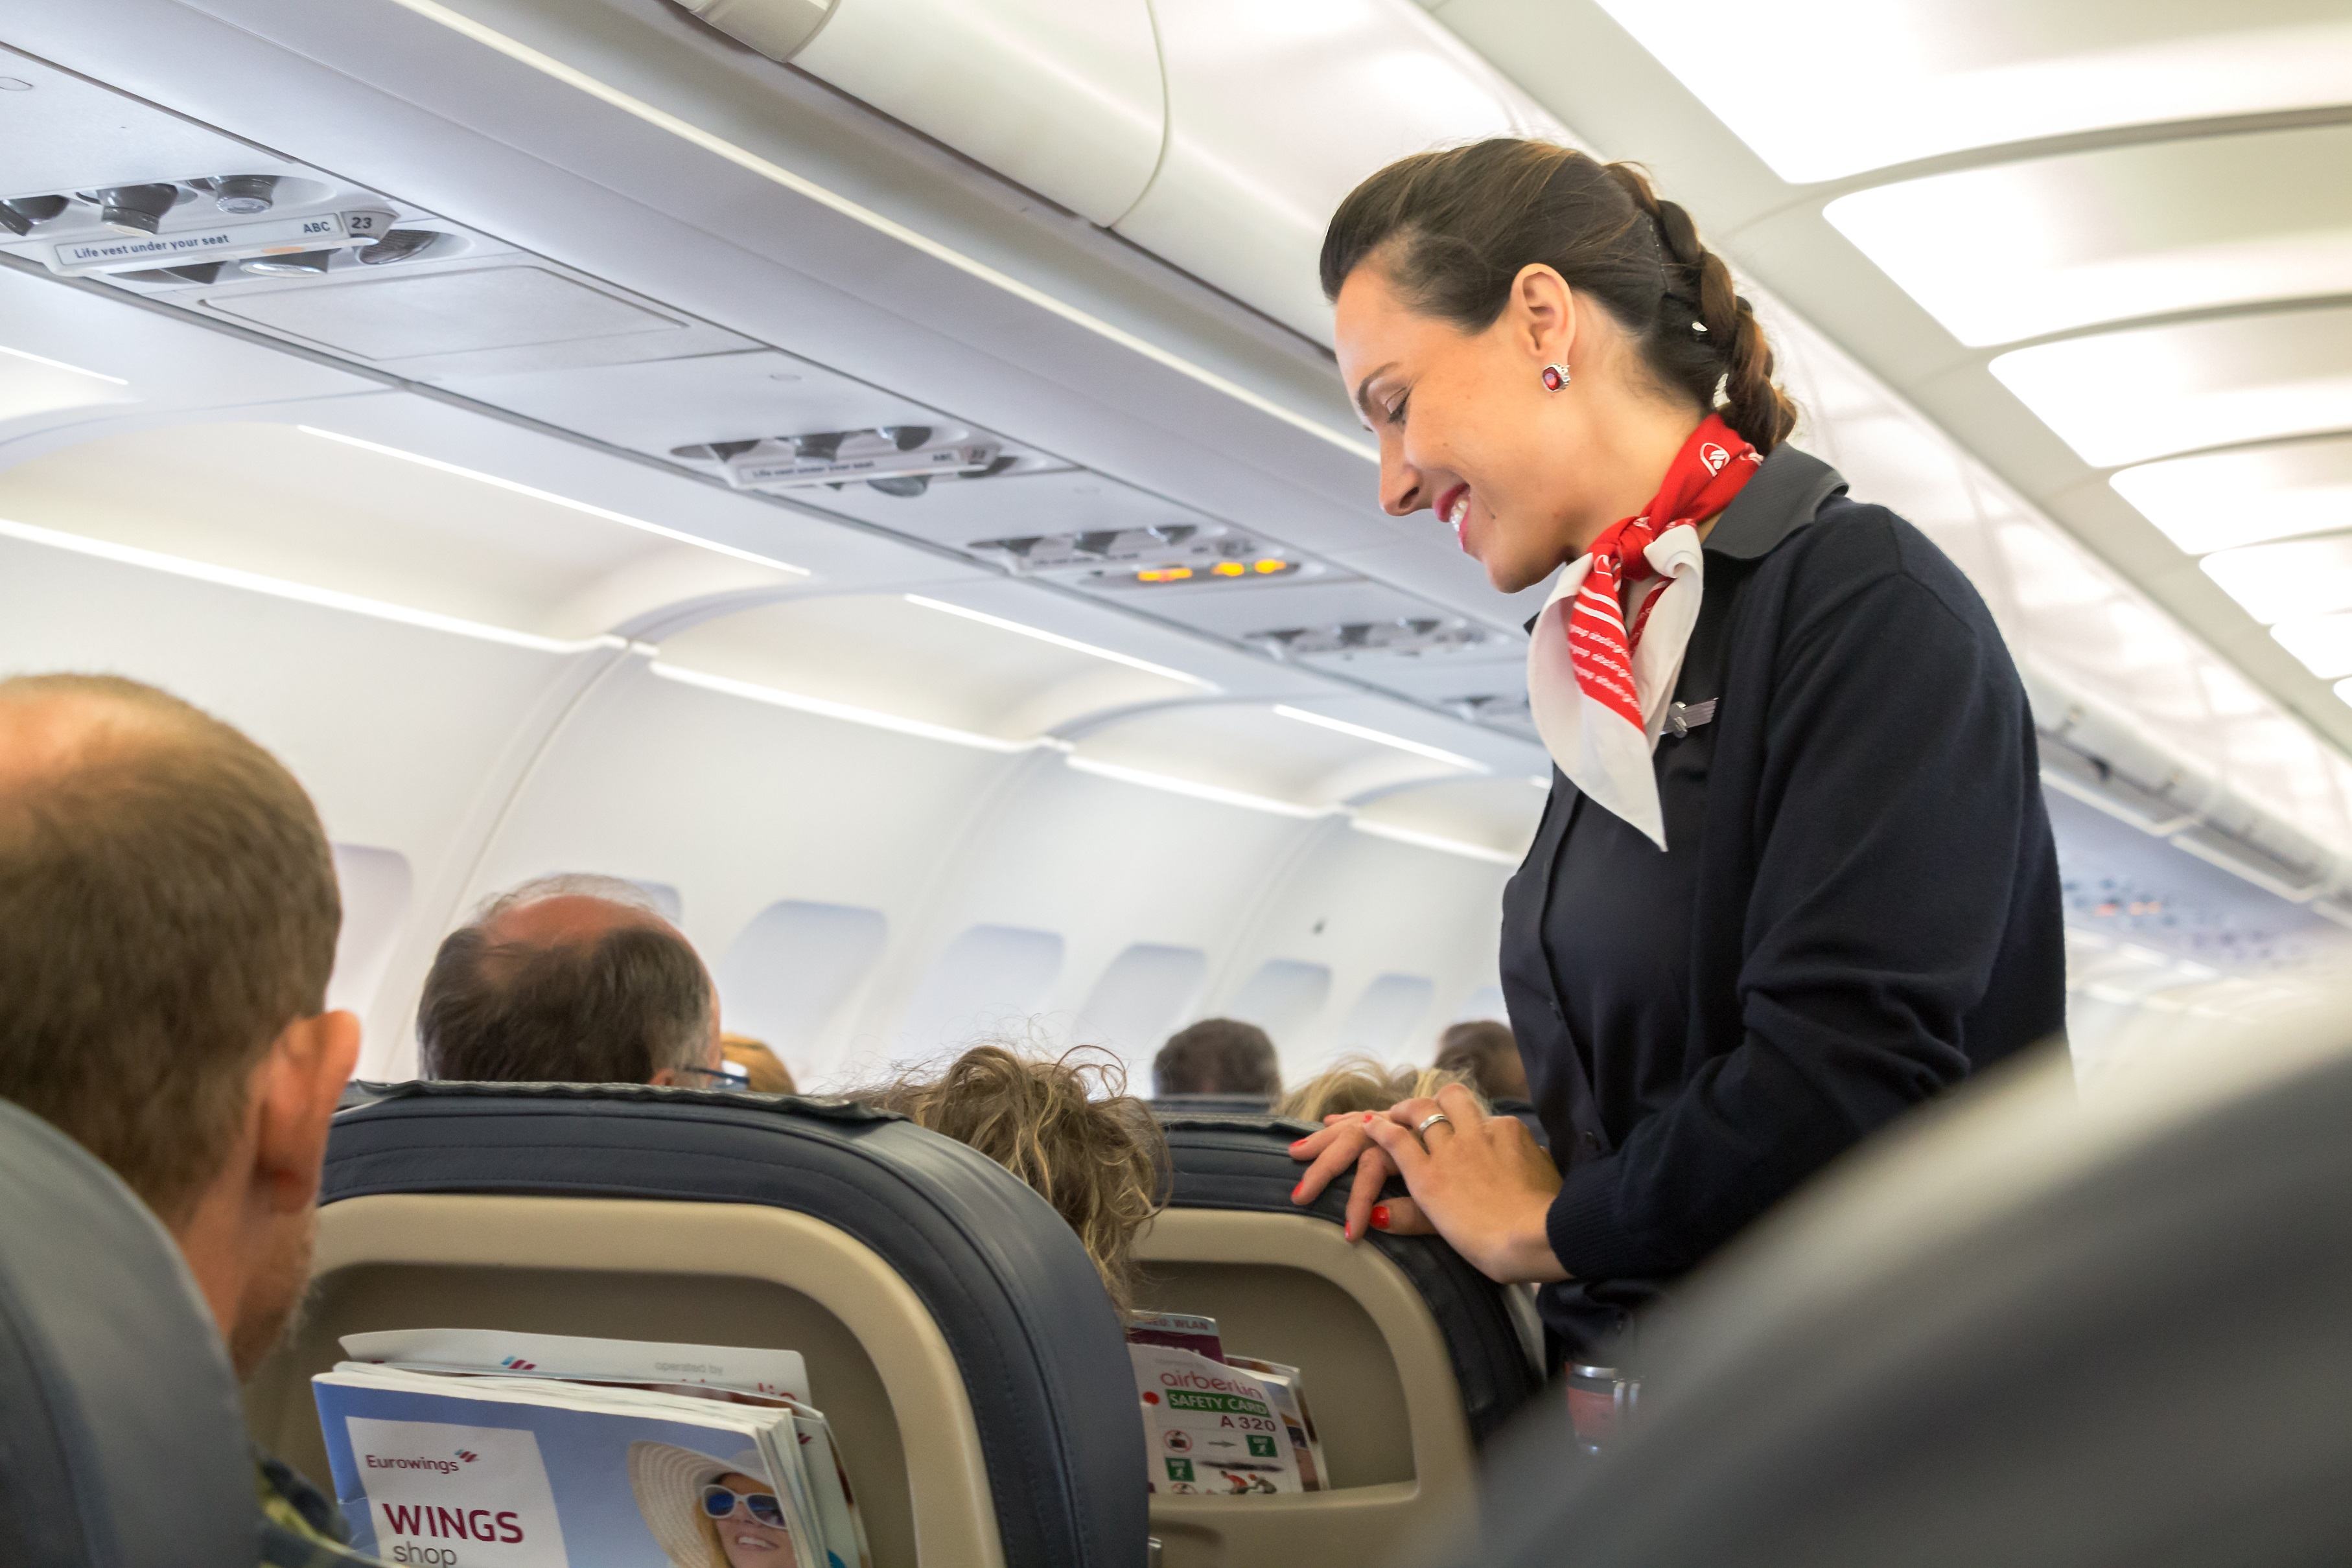 Flight Attendants Share the Craziest Things They've Seen That Make Them